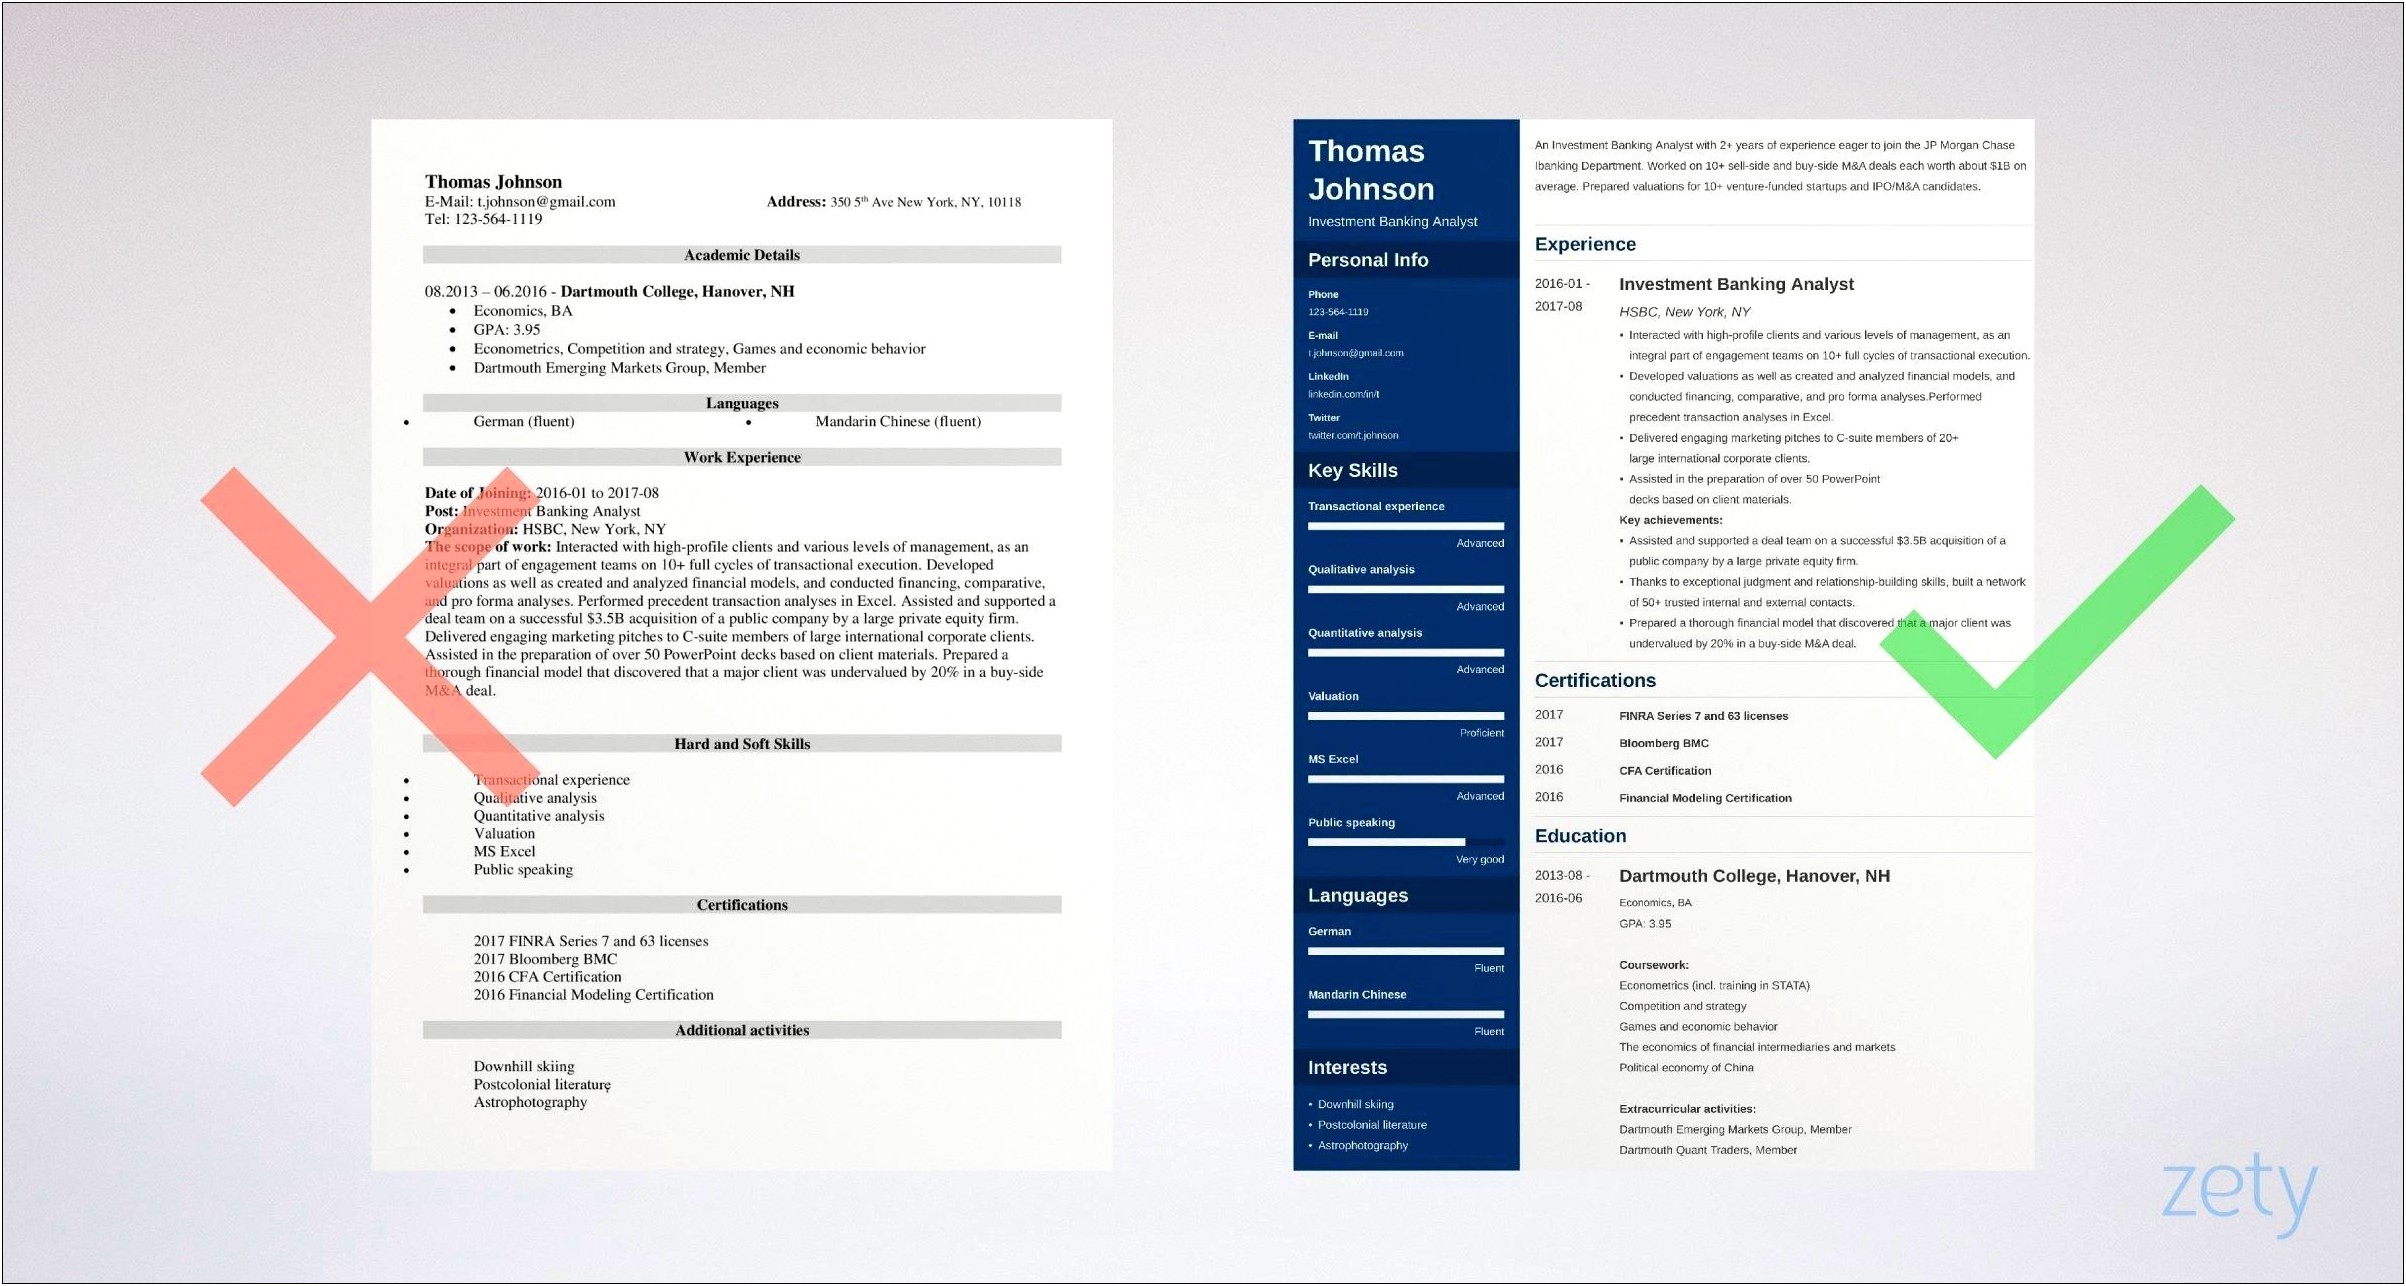 Do Finra Licenses Look Good On Resume